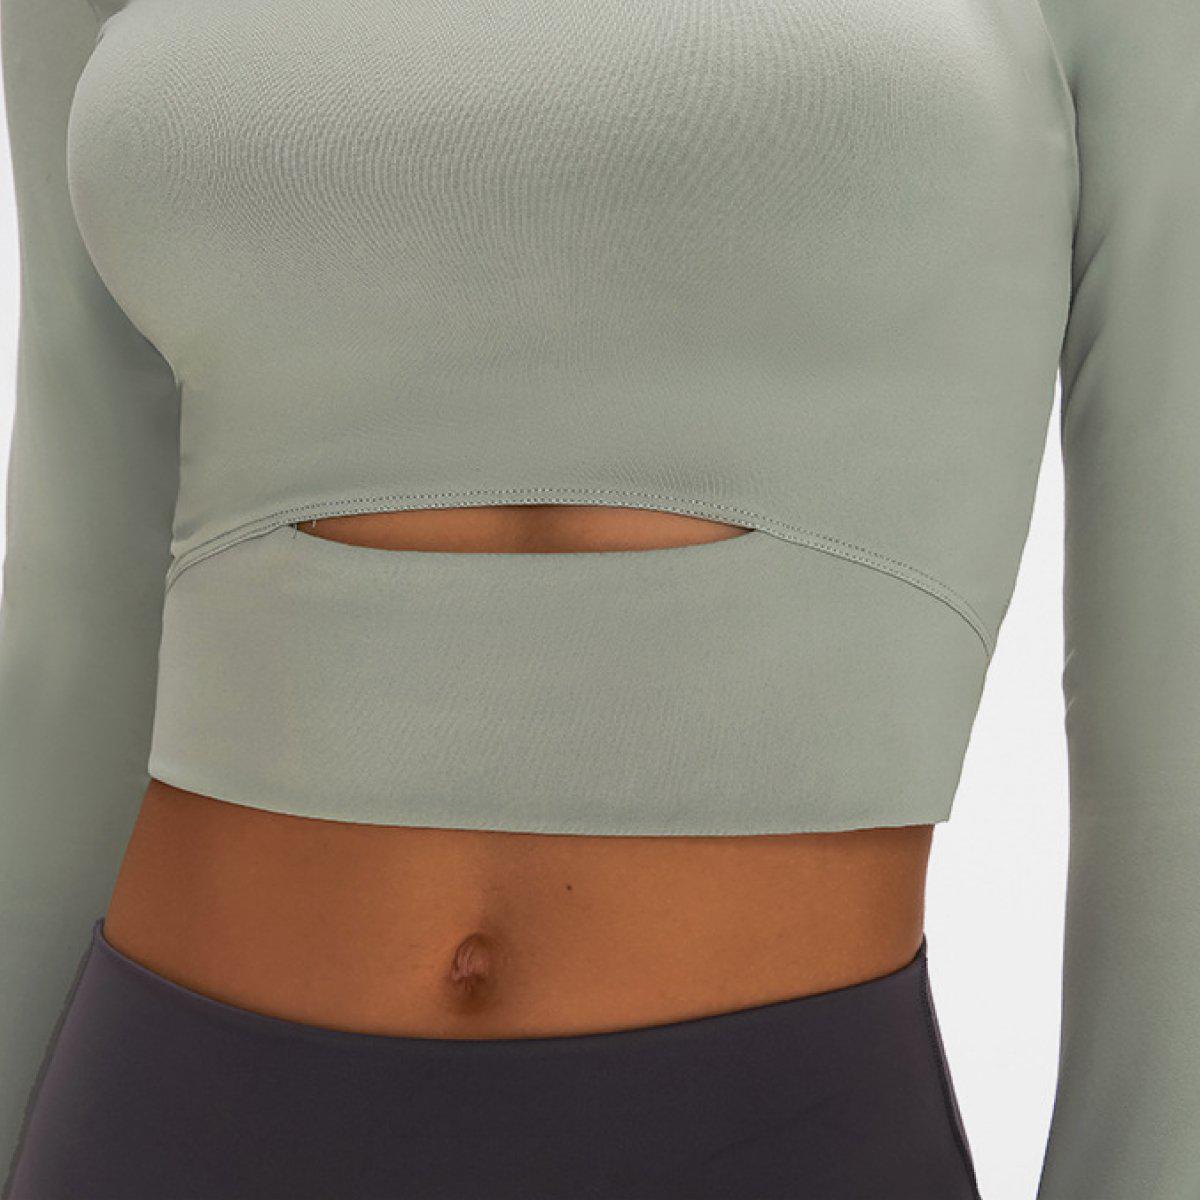 Long Sleeve Cropped Top With Sports Strap BLUE ZONE PLANET